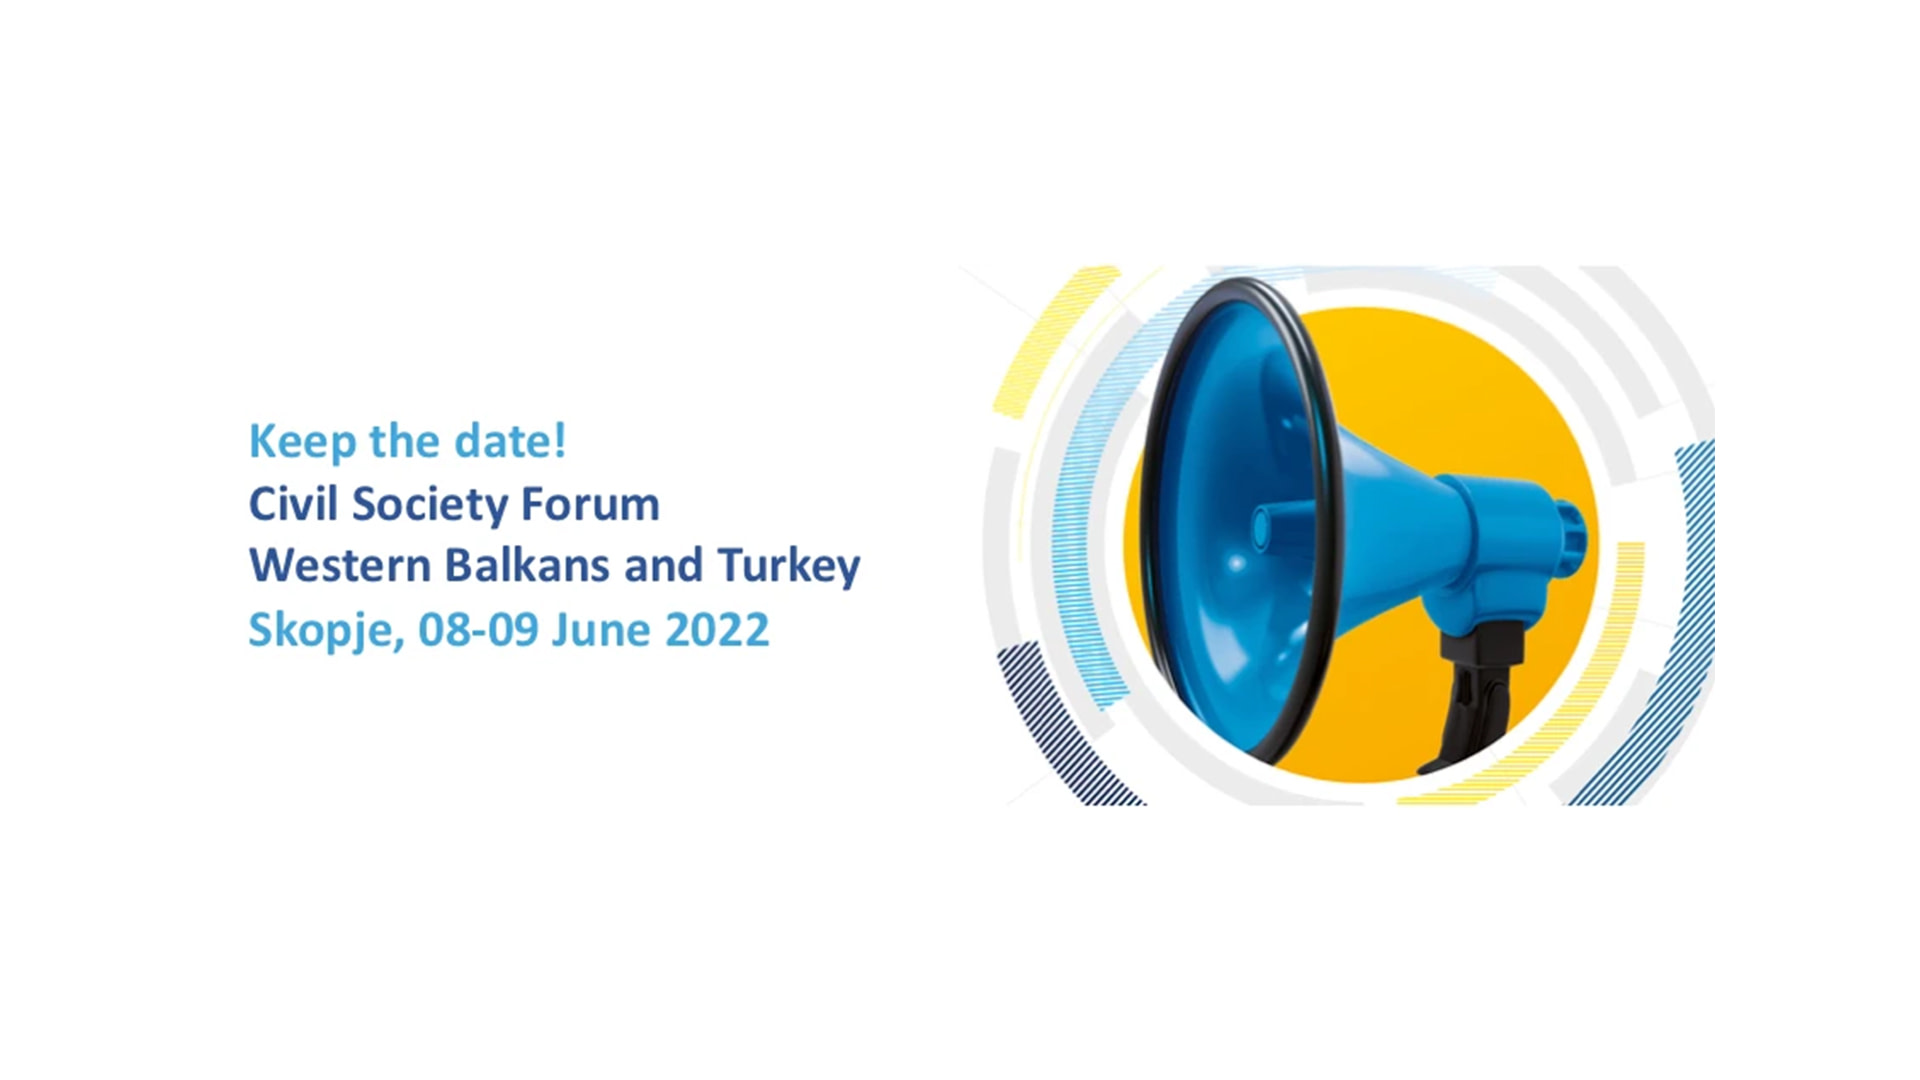 Next EU – Civil Society Forum meeting for the Western Balkans and Turkey takes place on 8 and 9 June in Skopje, North Macedonia